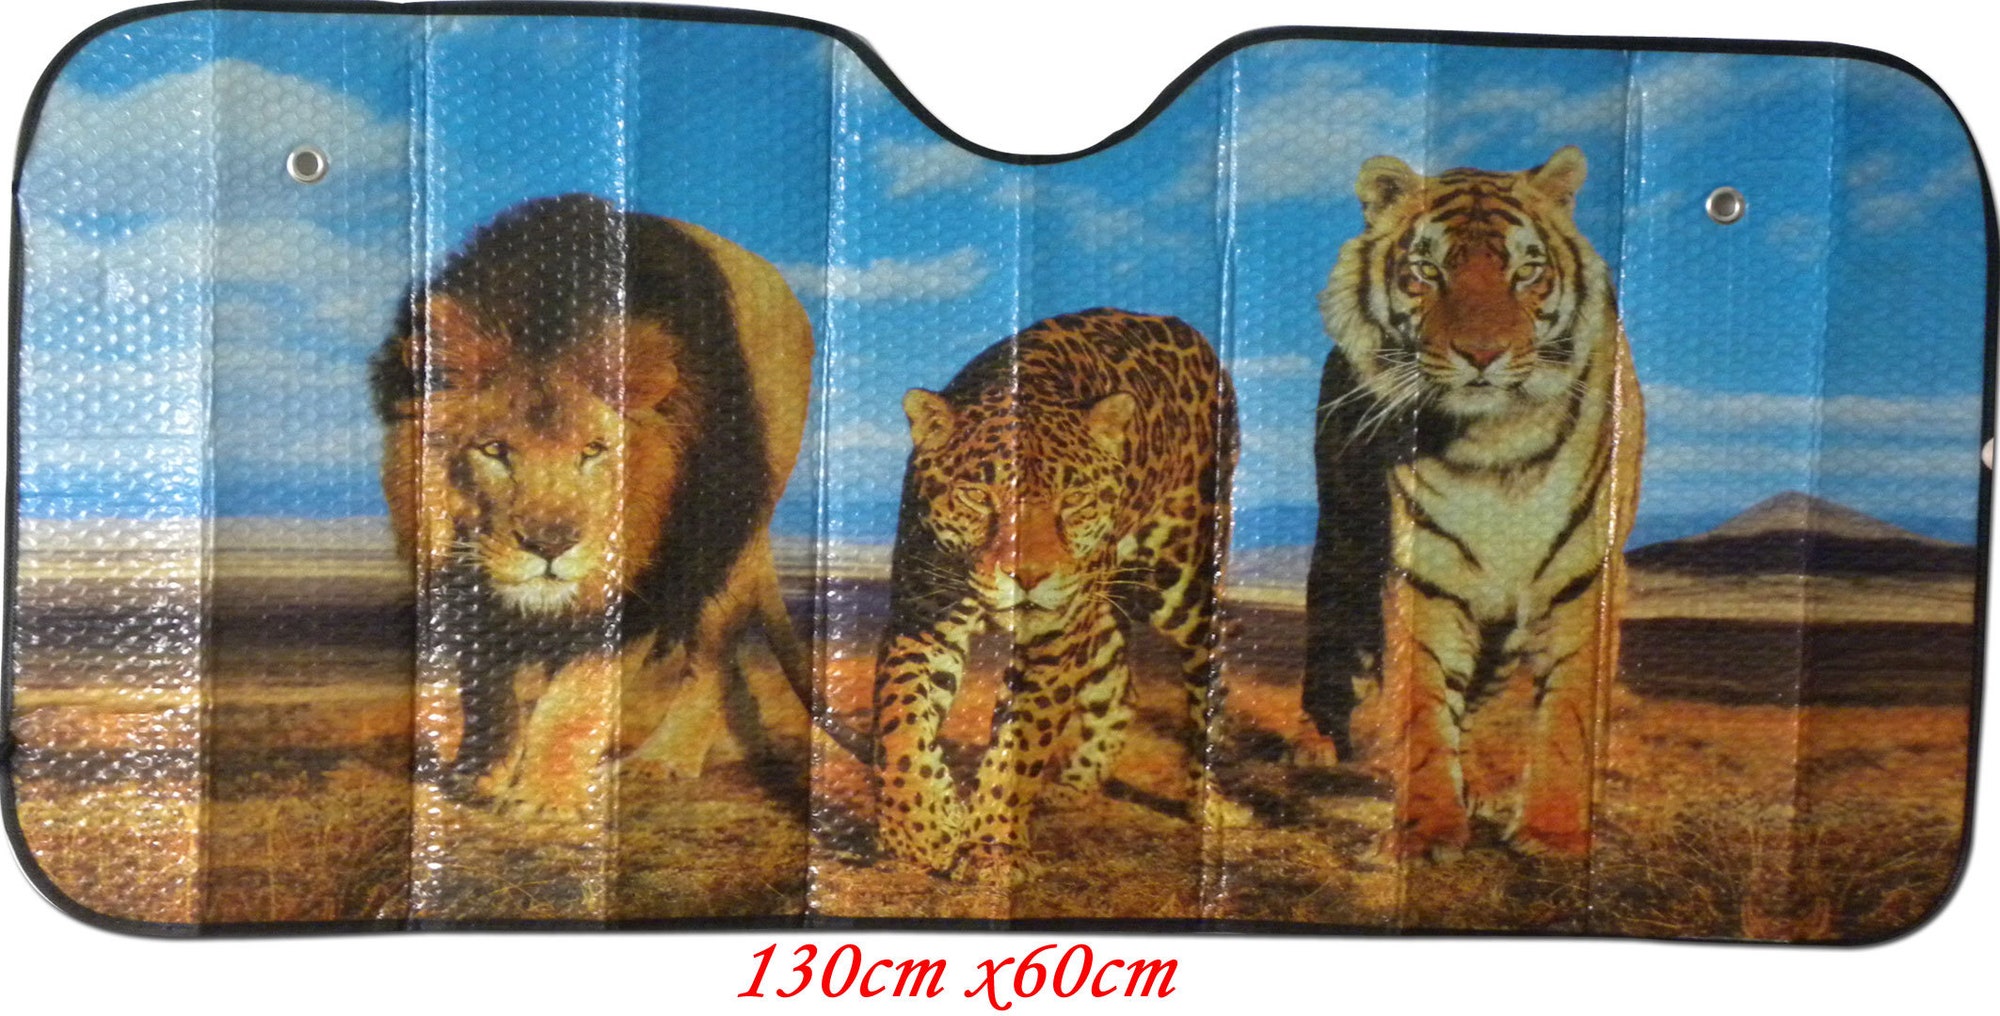 Discover Car window sunshade  with a cool design three big cats